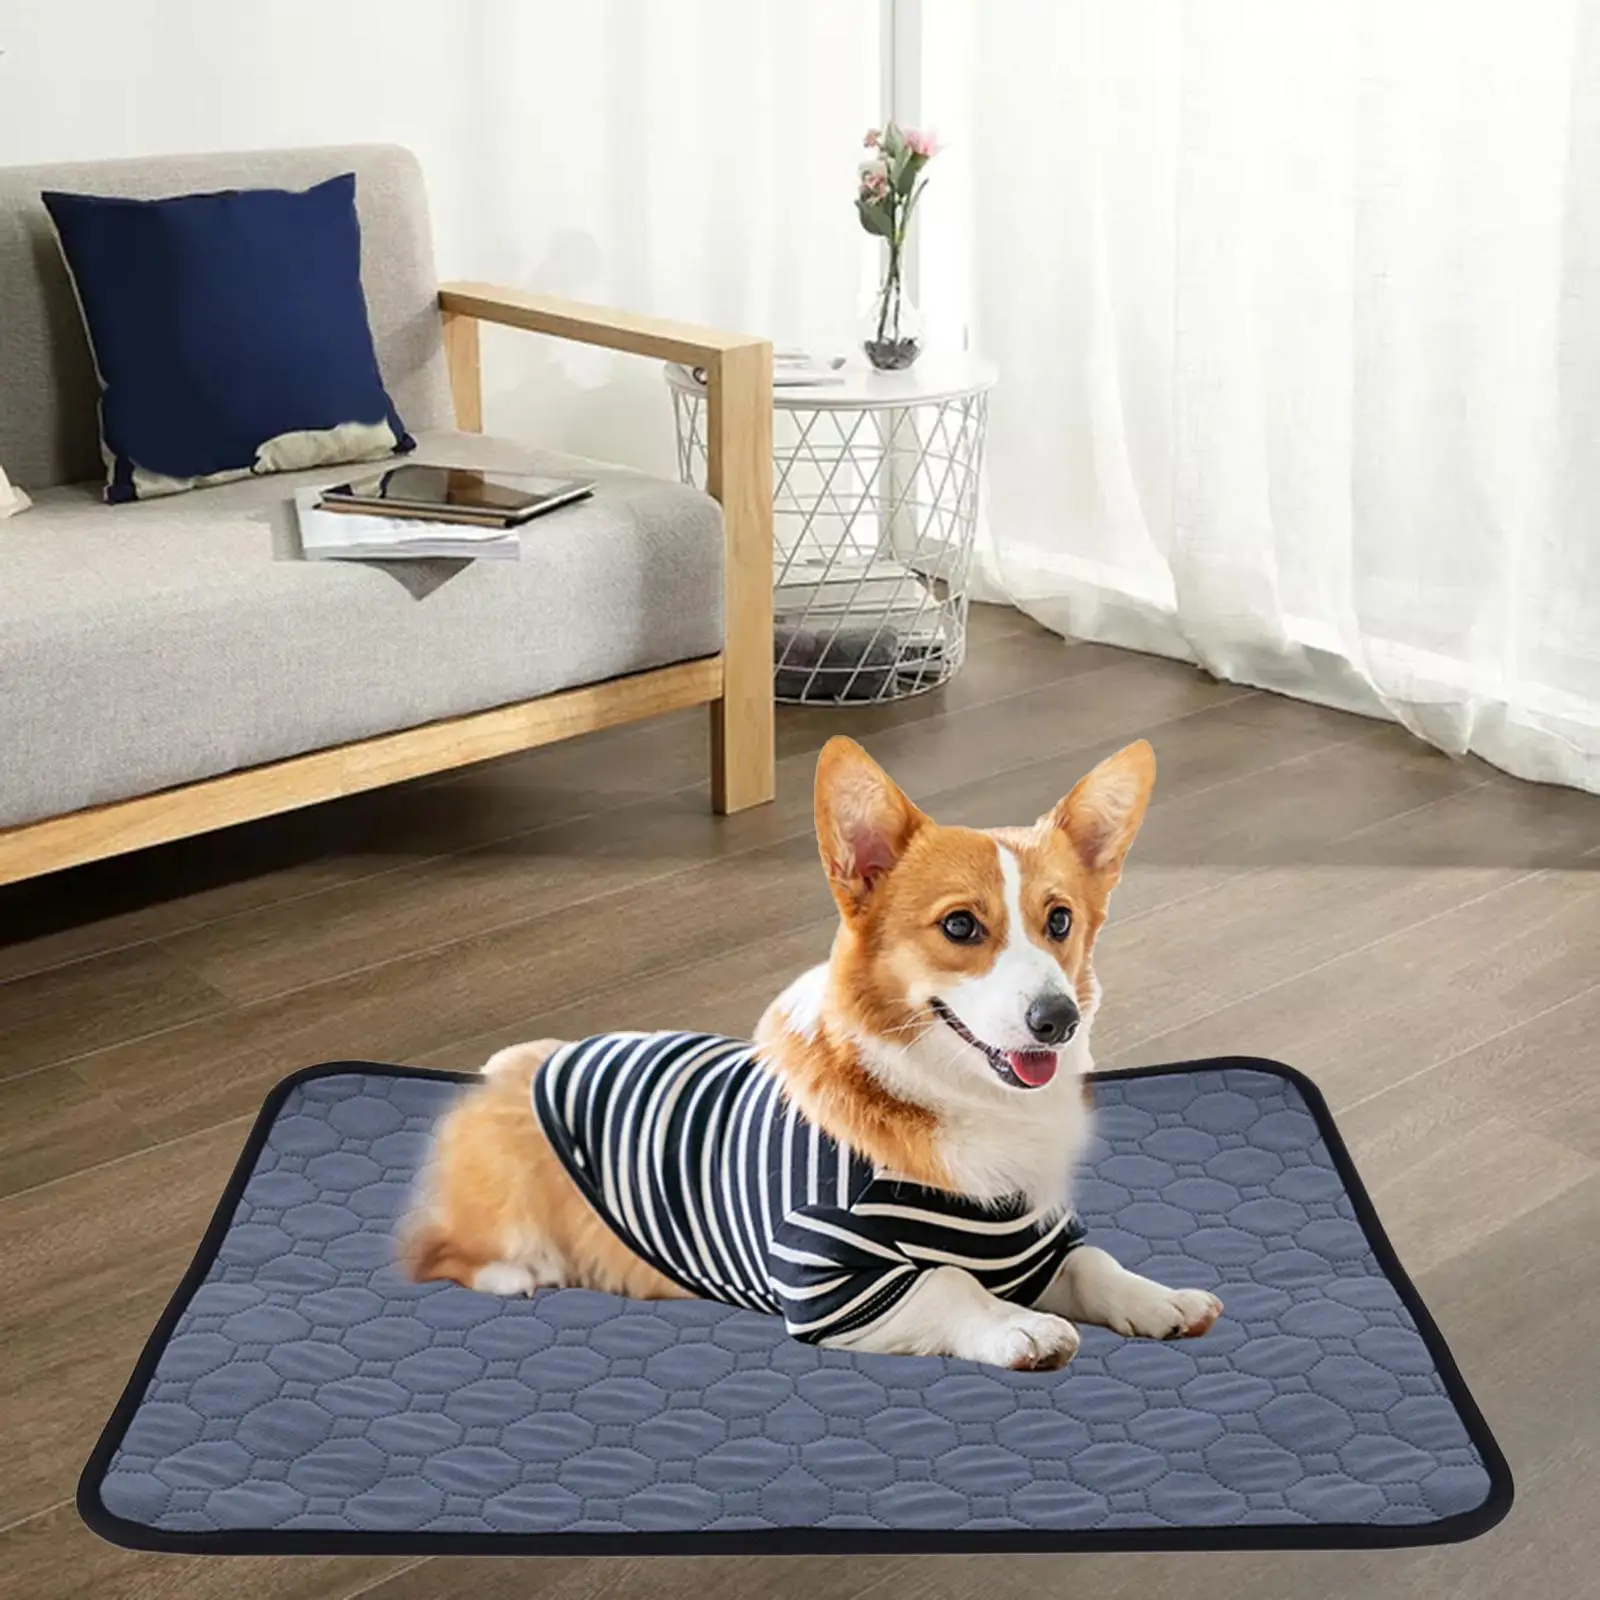 Waterproof Pee Pad Urine Mat Fast Absorbent Non-Slip Reusable Washable for Puppy Incontinence Supplies Indoor Pet Training